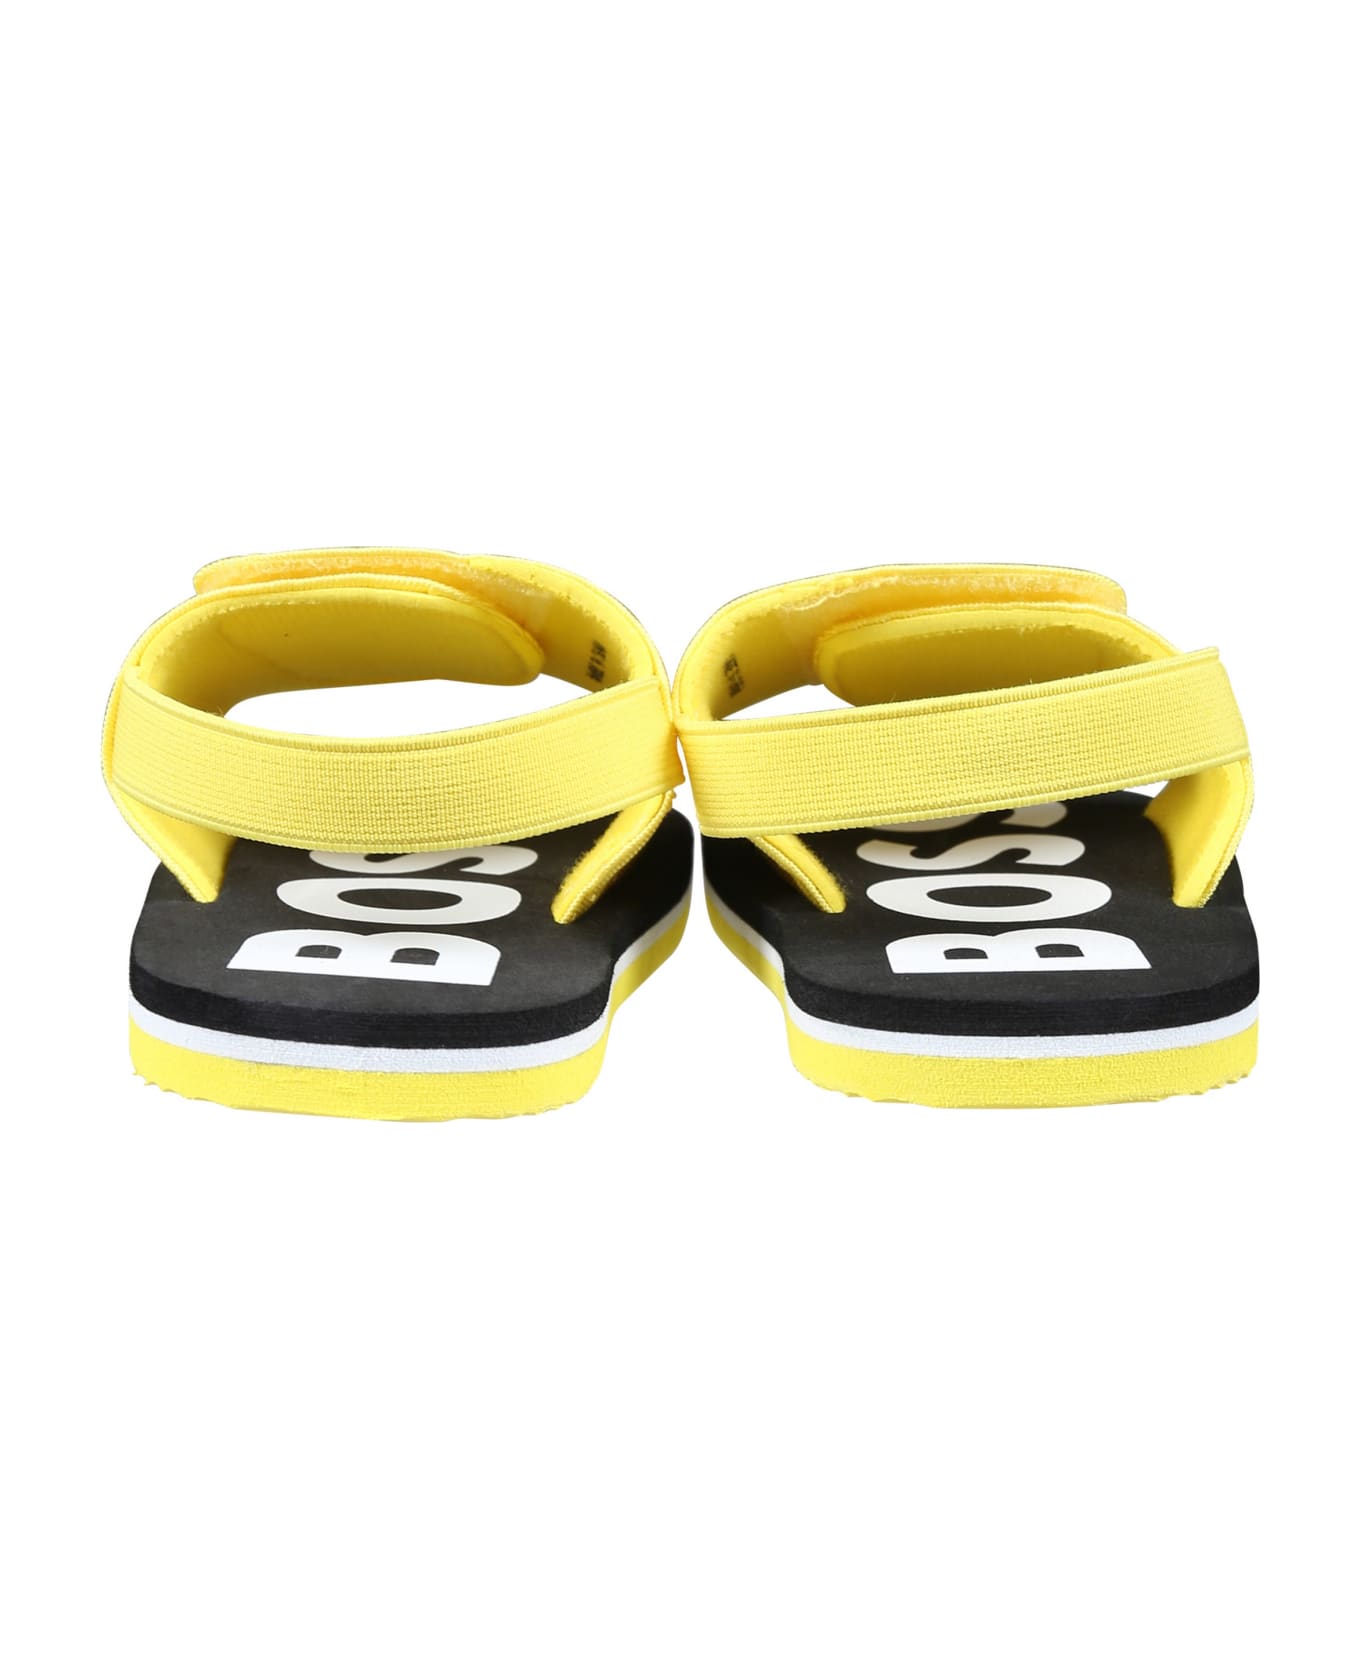 Hugo Boss Yellow Sandals For Boy With Logo - Yellow